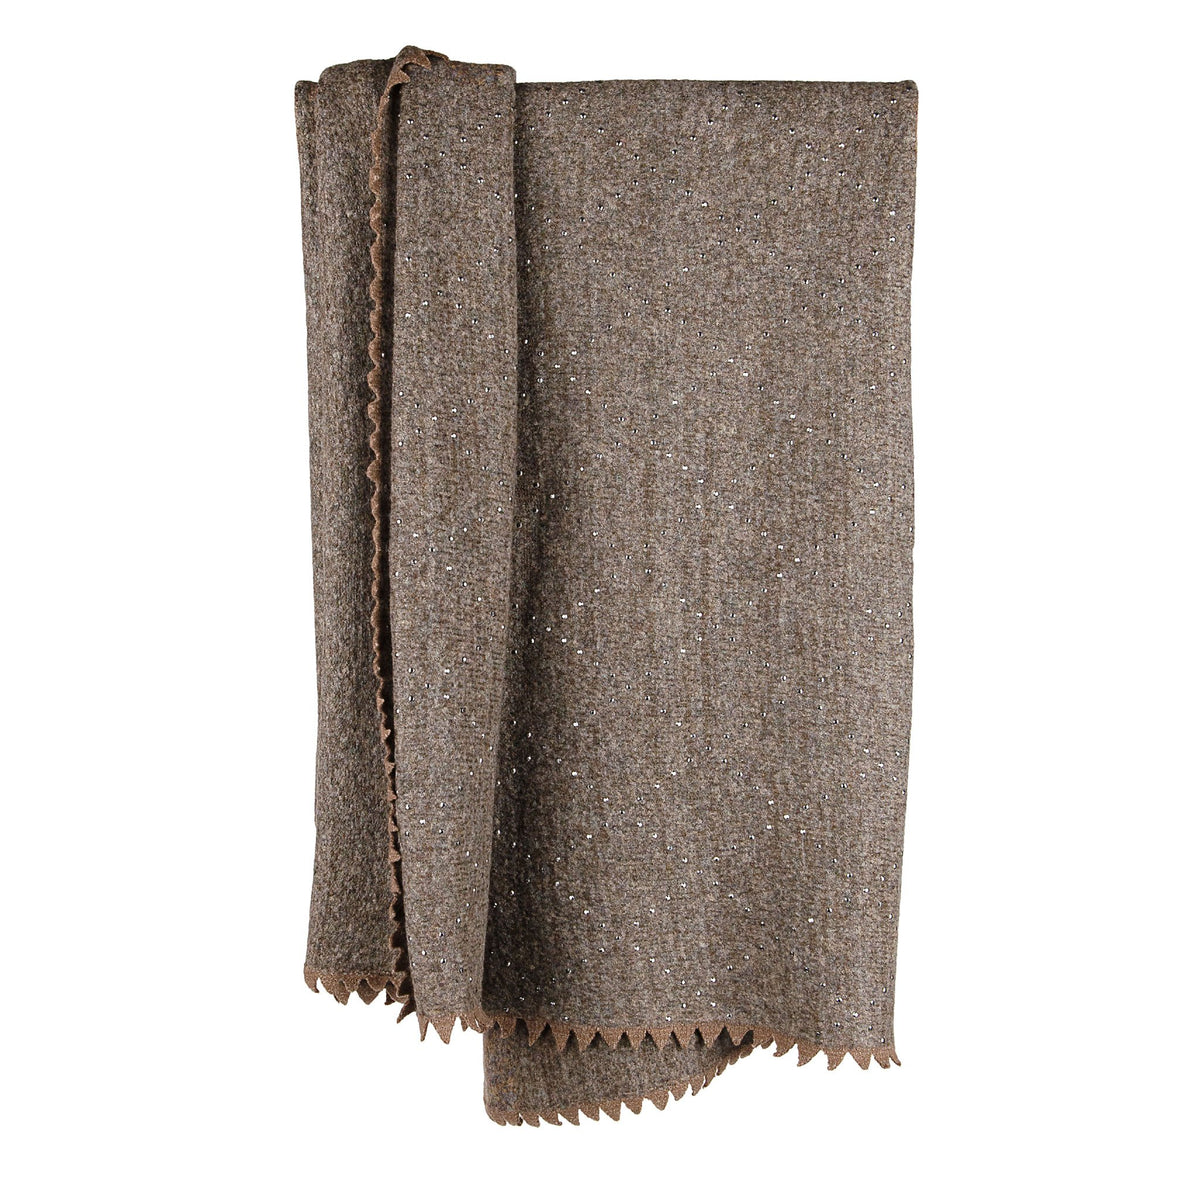 Taupe colored Merino Boucle Knitted Throw